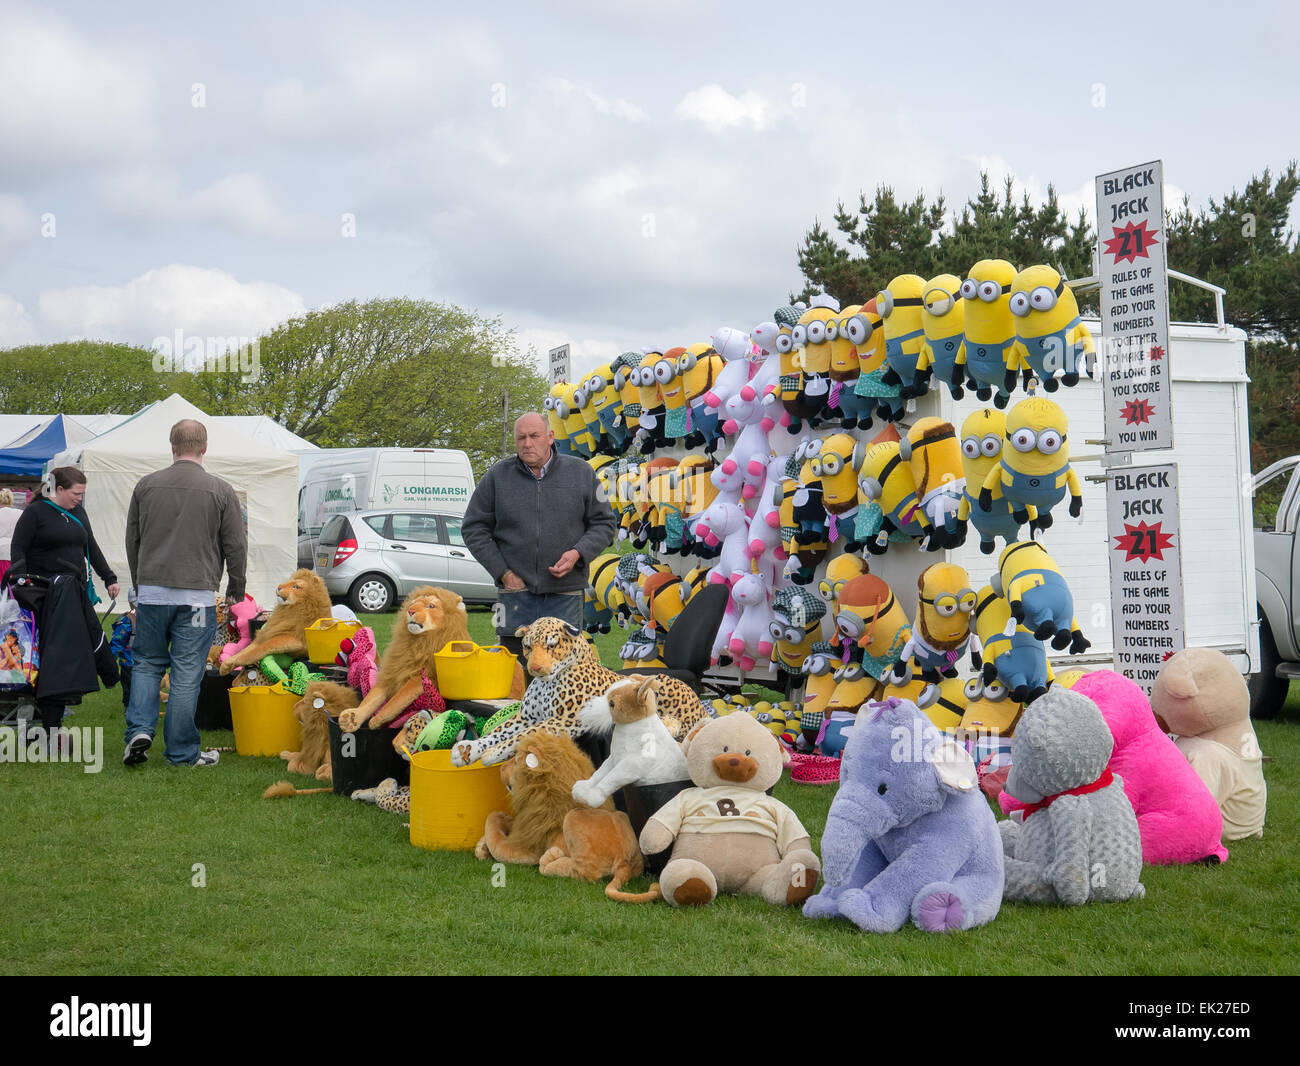 a black Jack tombola stall at a fairground Stock Photo